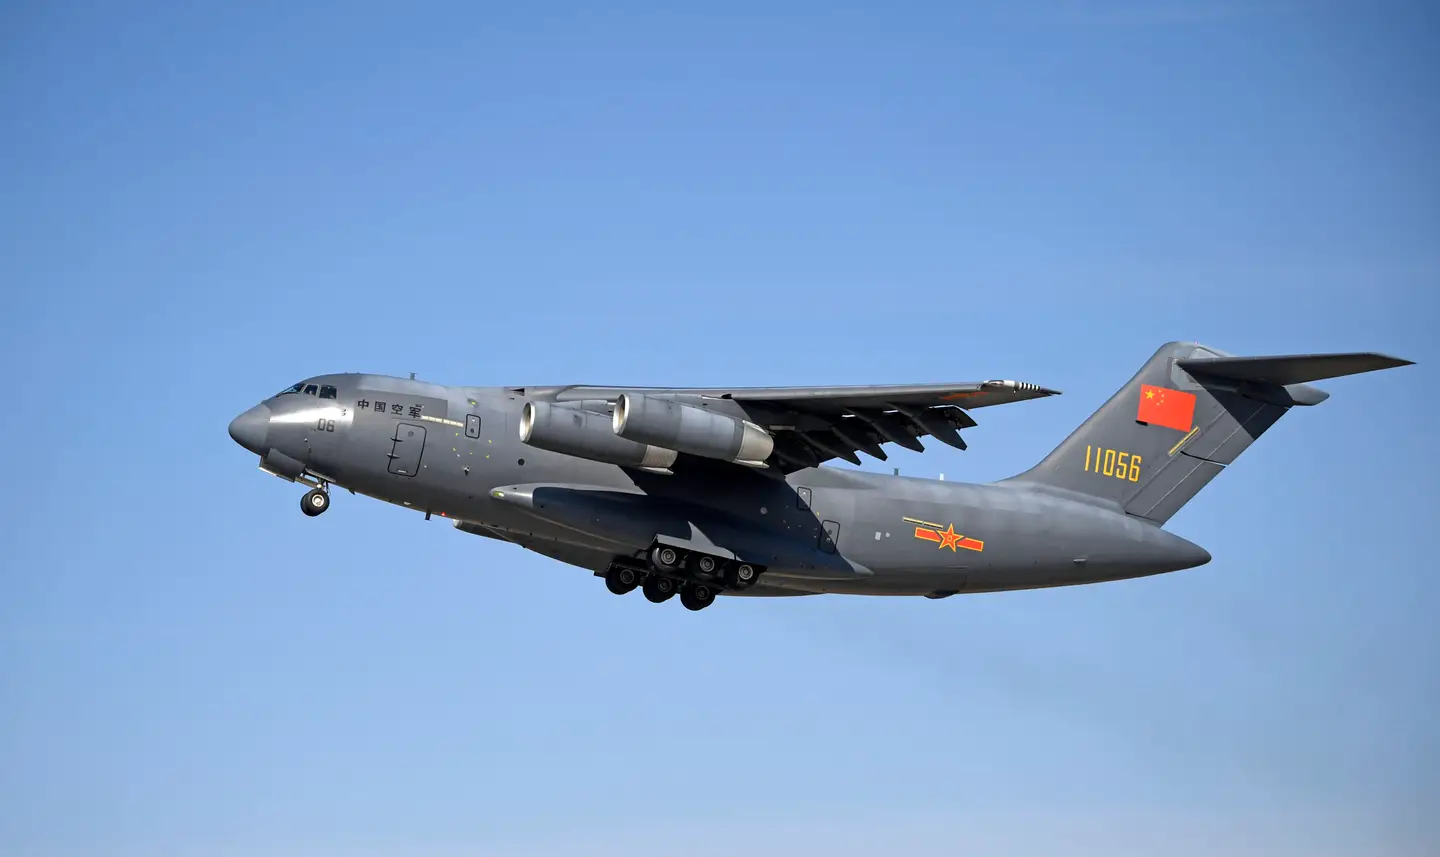 Xi'an Y-20B transport aircraft received Chinese WS-20 engines instead of the Russian D-30KP-2